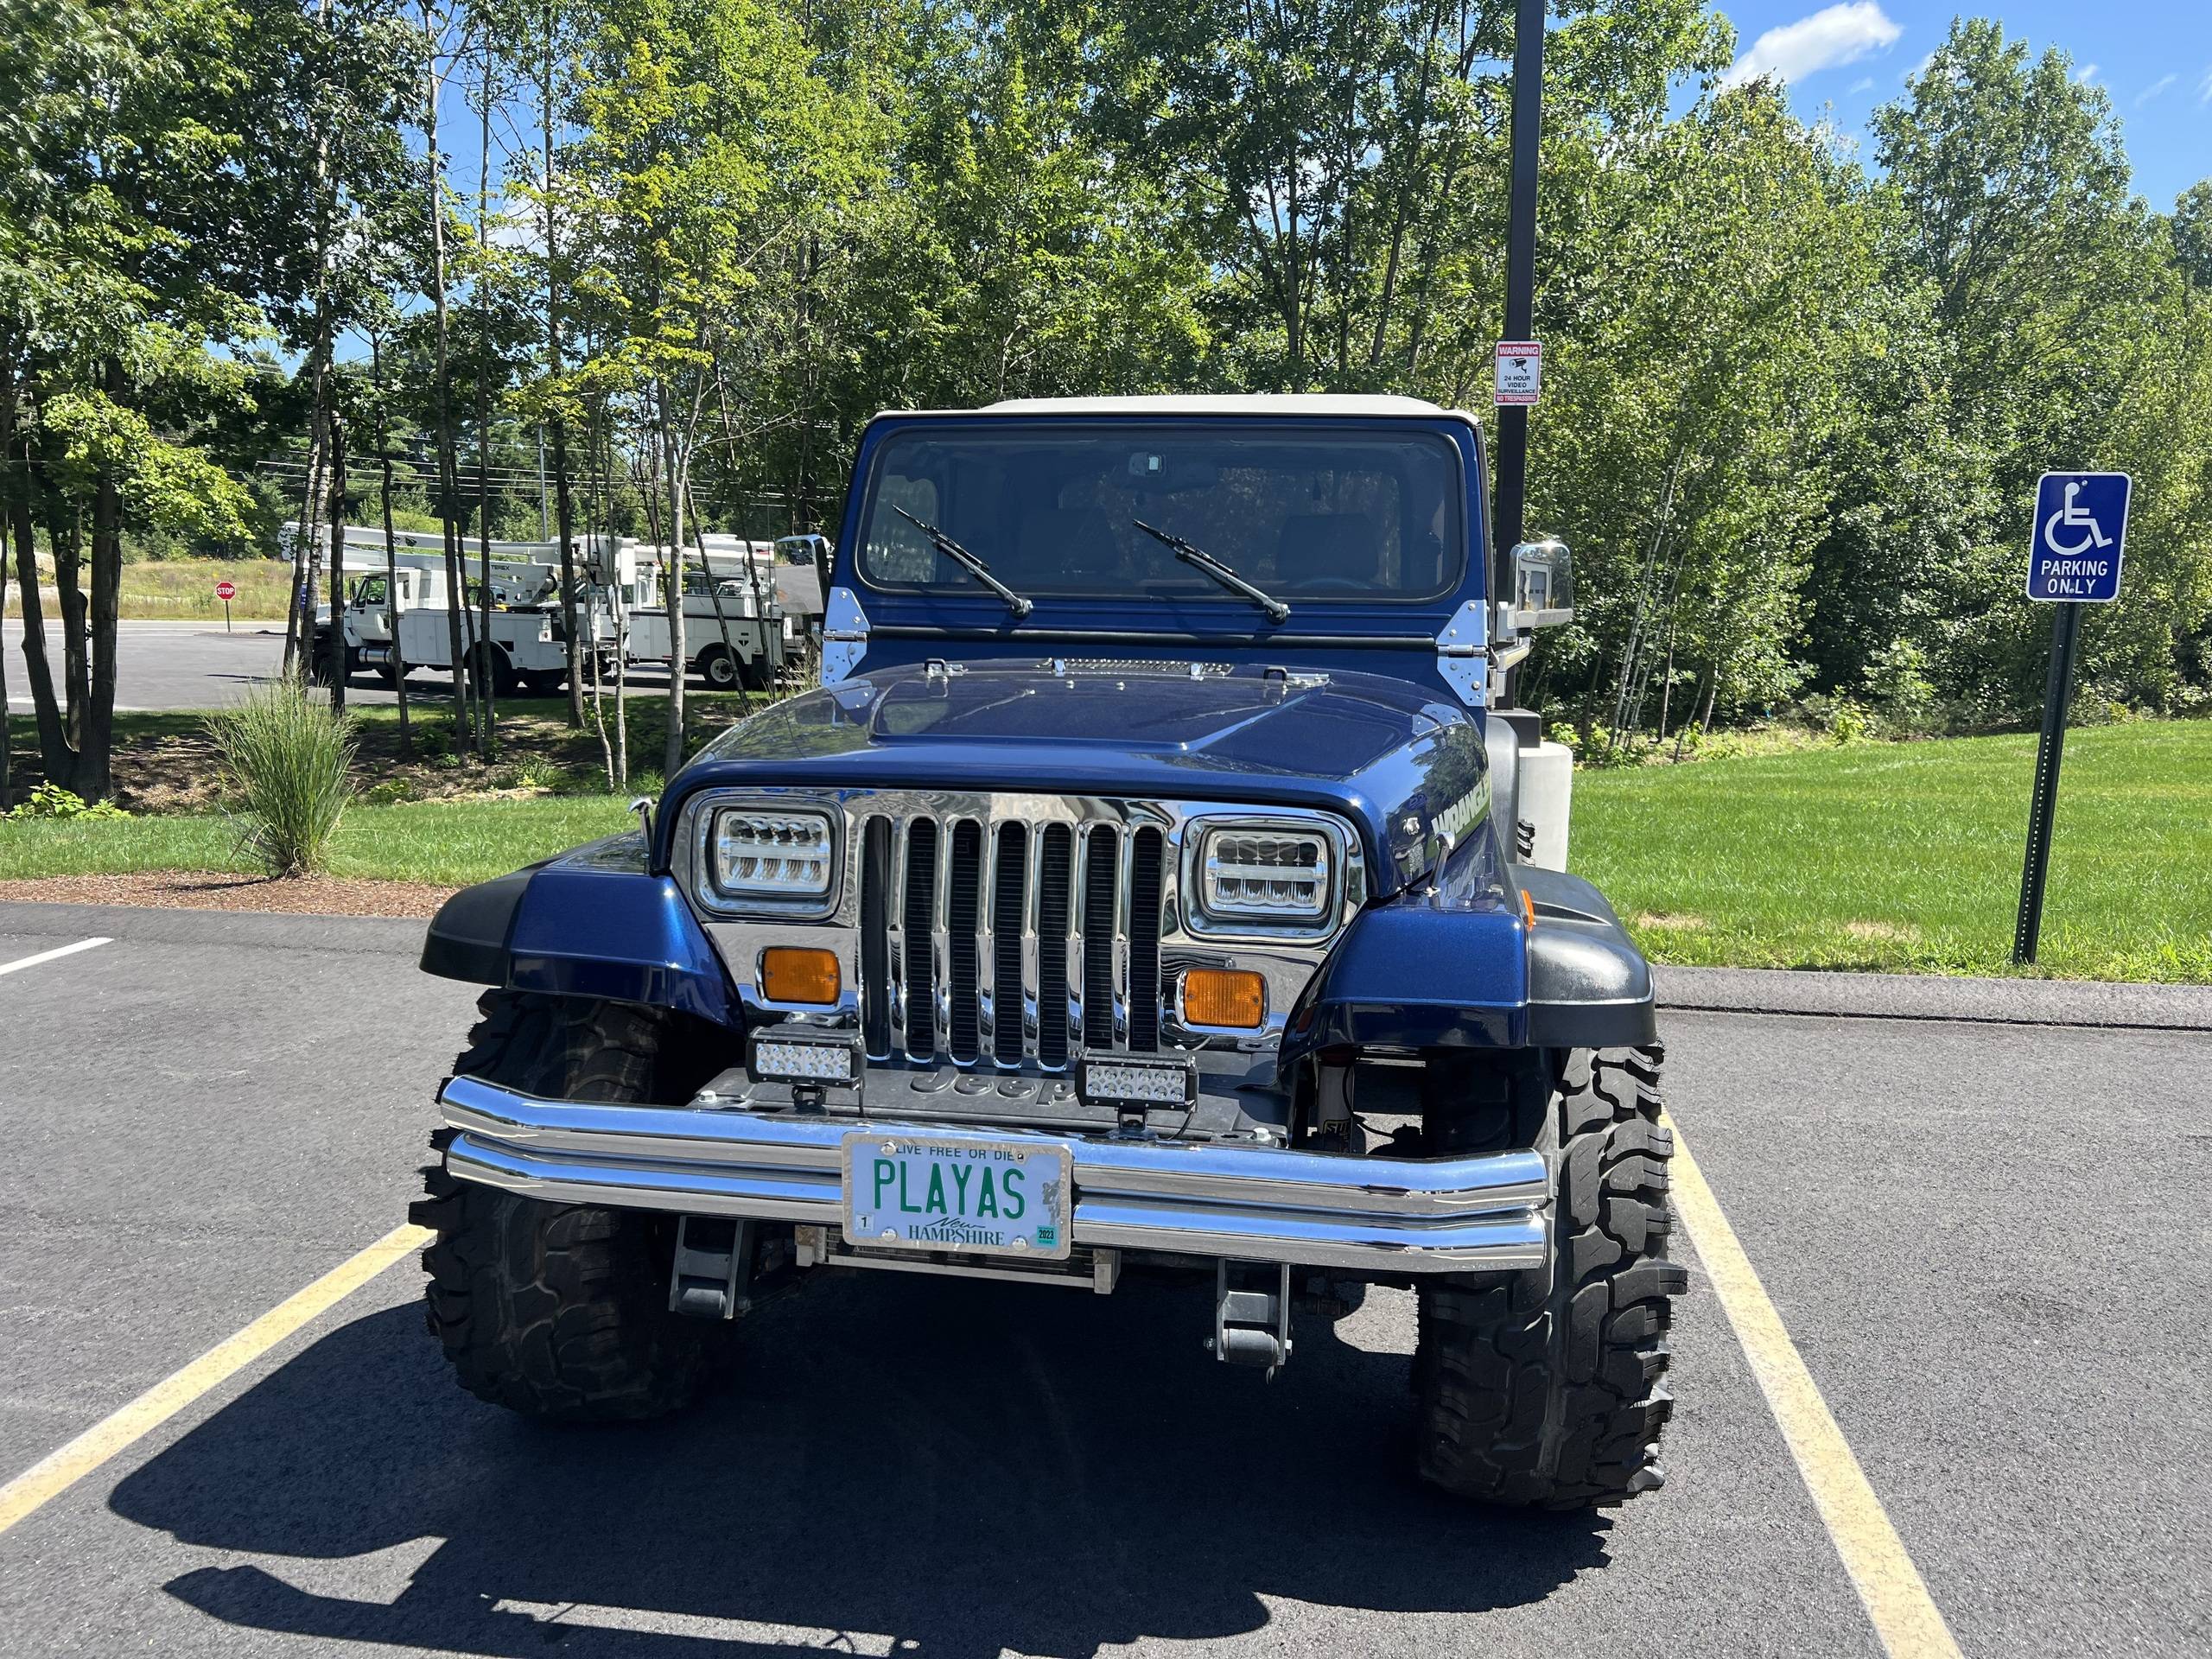 1989 Jeep Wrangler Supercharged 19